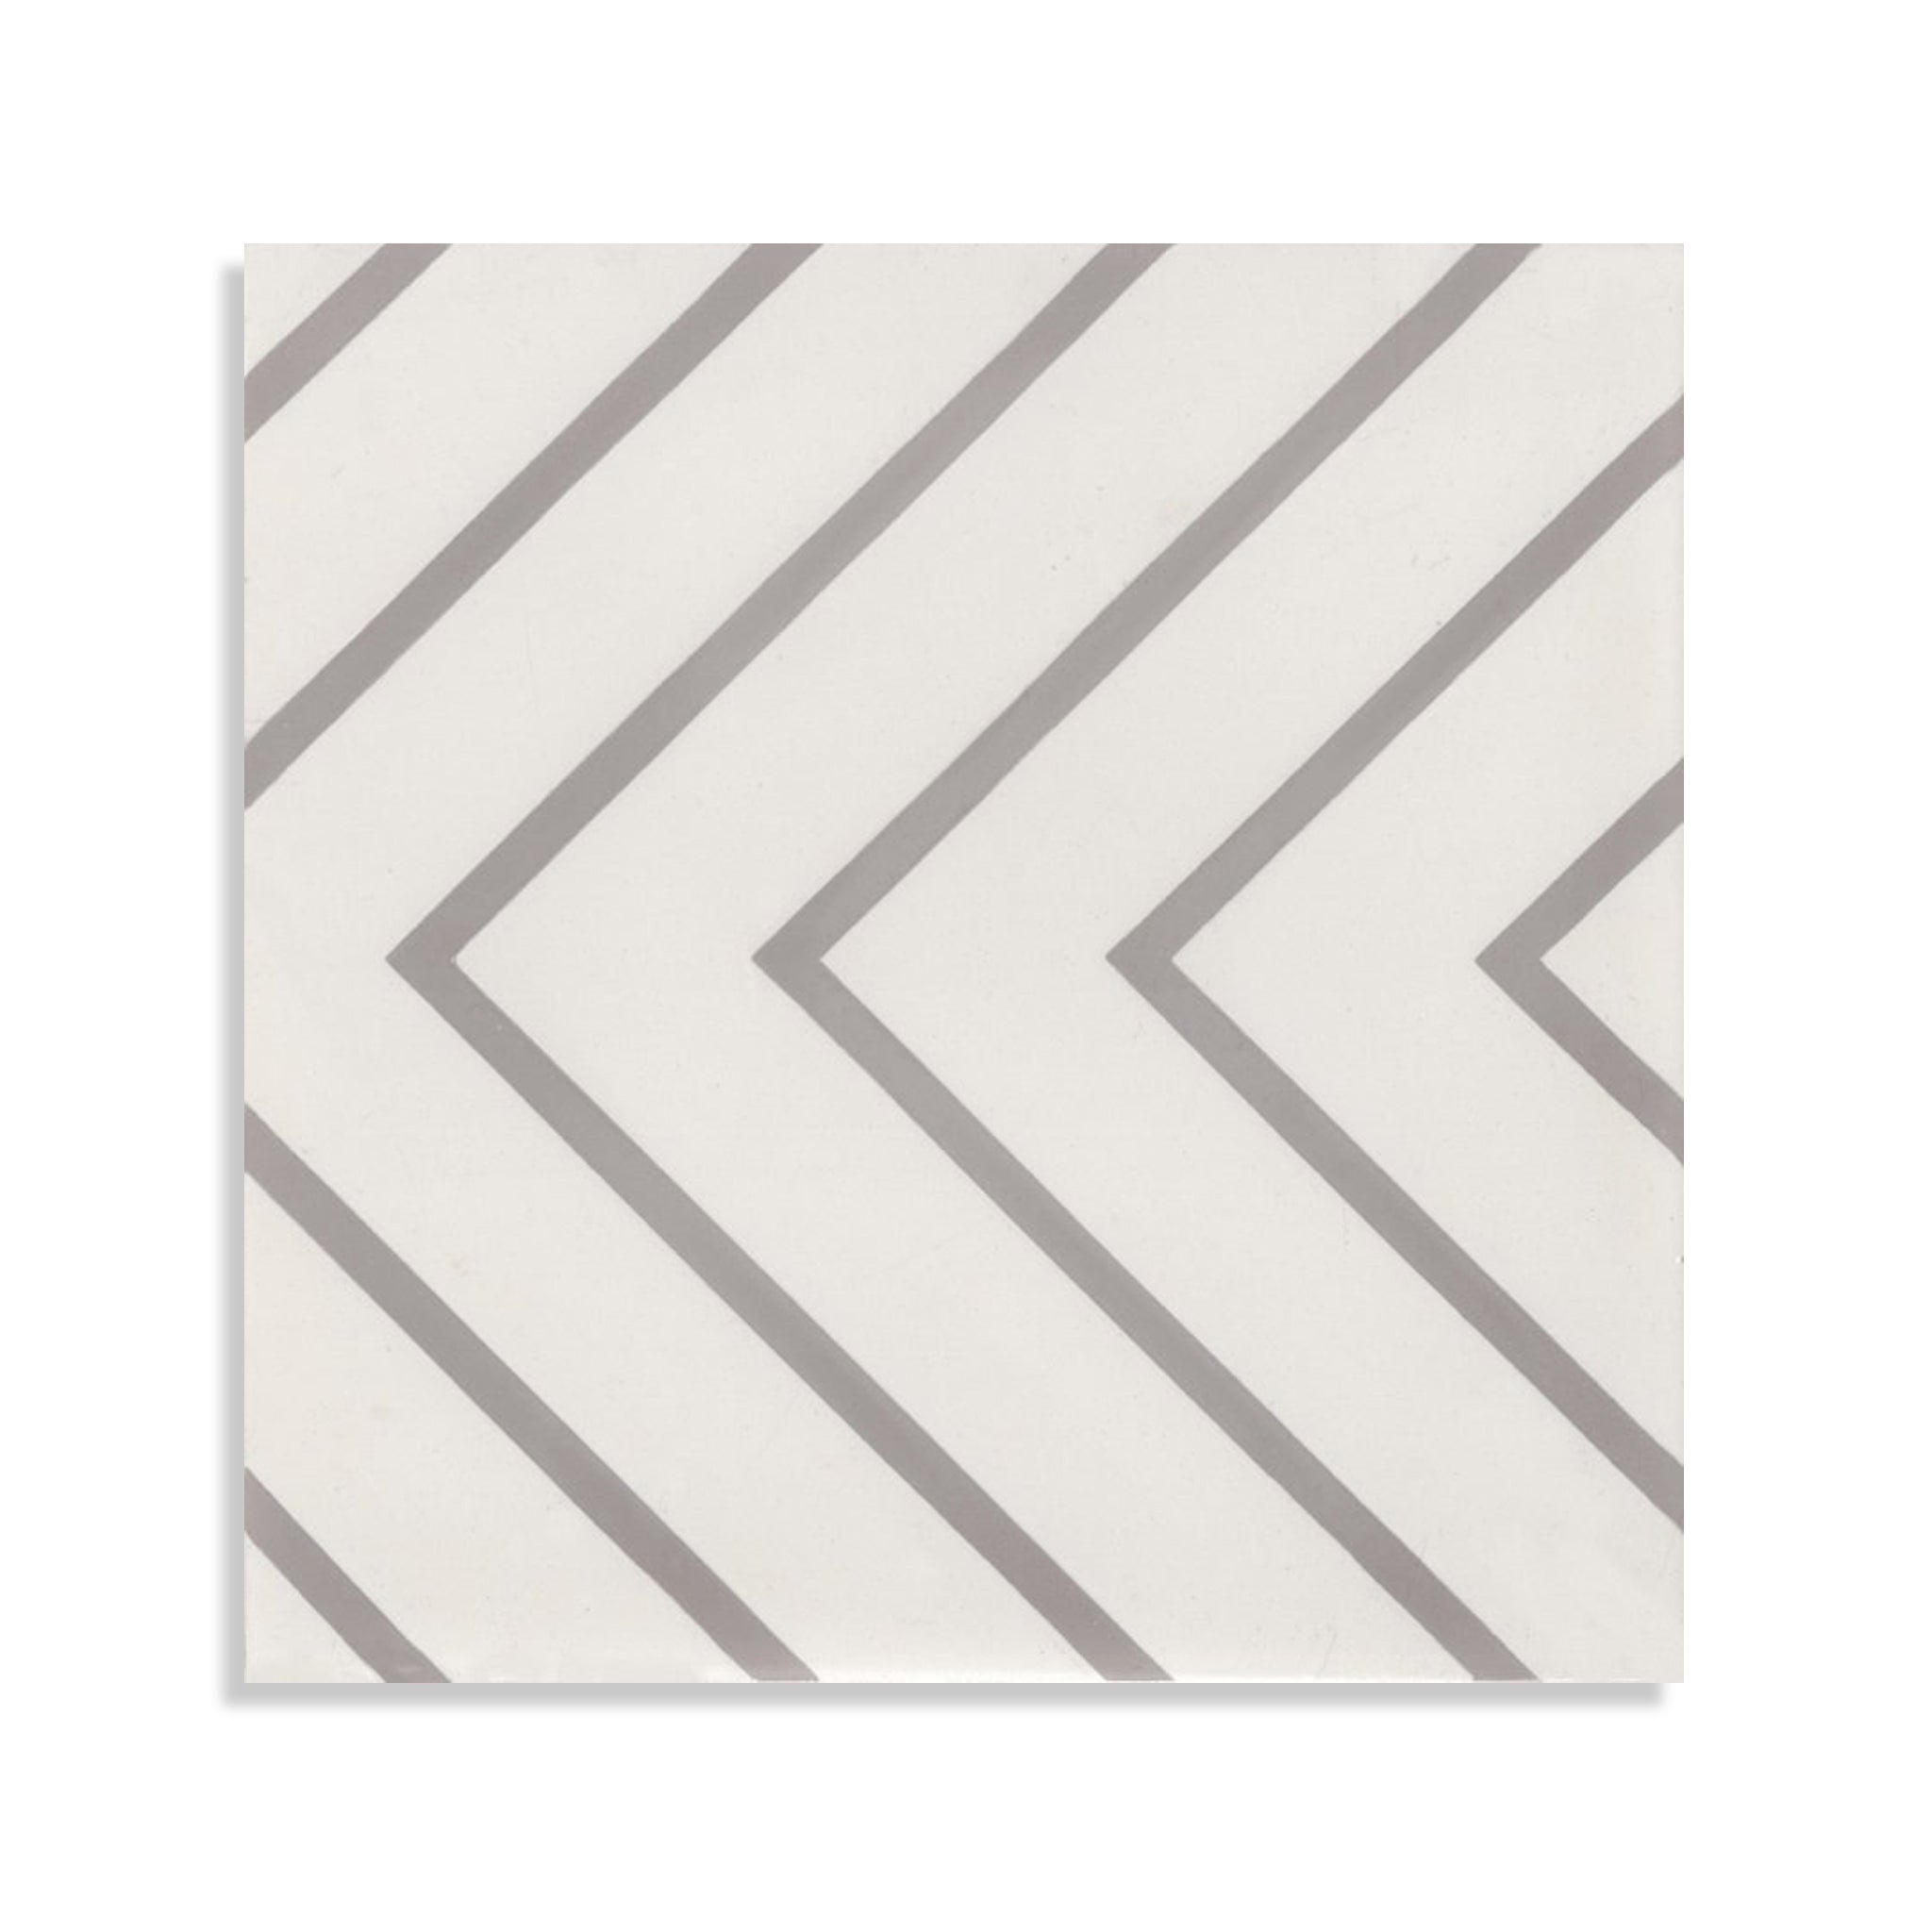 Moroccan Encaustic Cement Pattern 07ck, 20 x 20cm - Tiles &amp; Stone To You